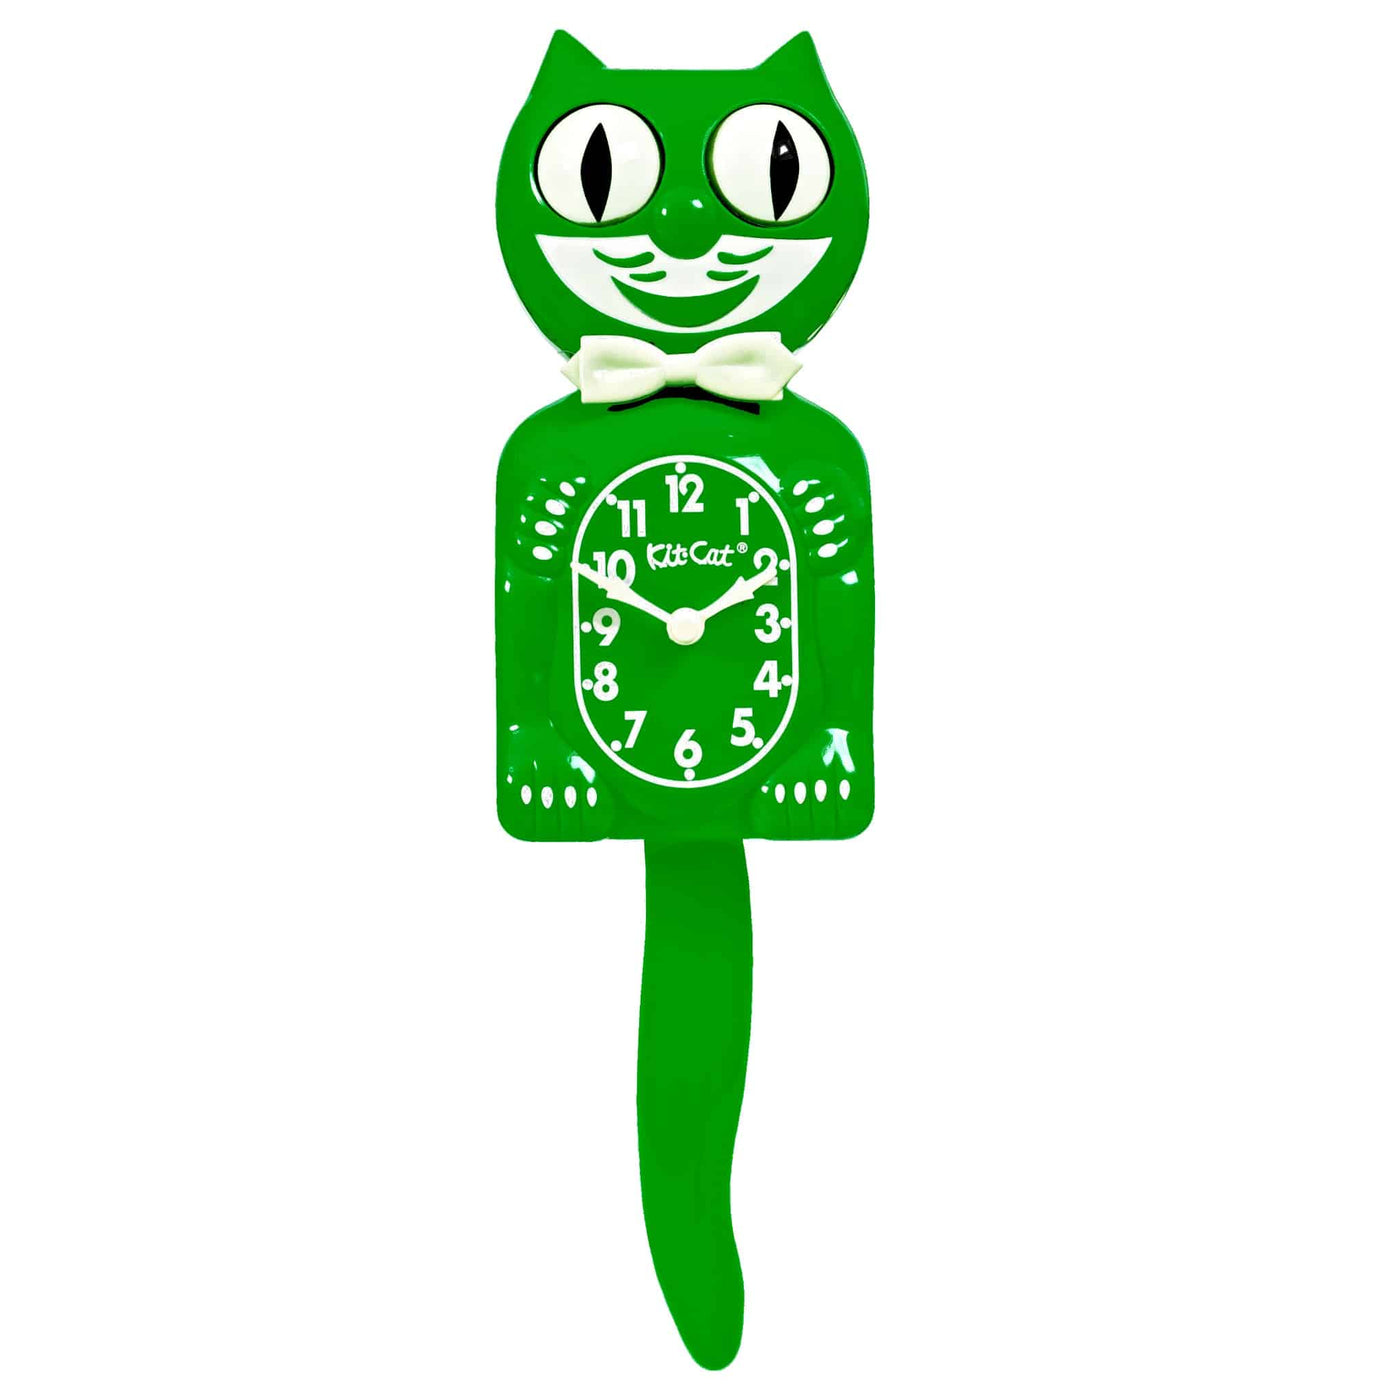 GREEN KIT CAT CLOCK 15.5" LIMITED EDITION